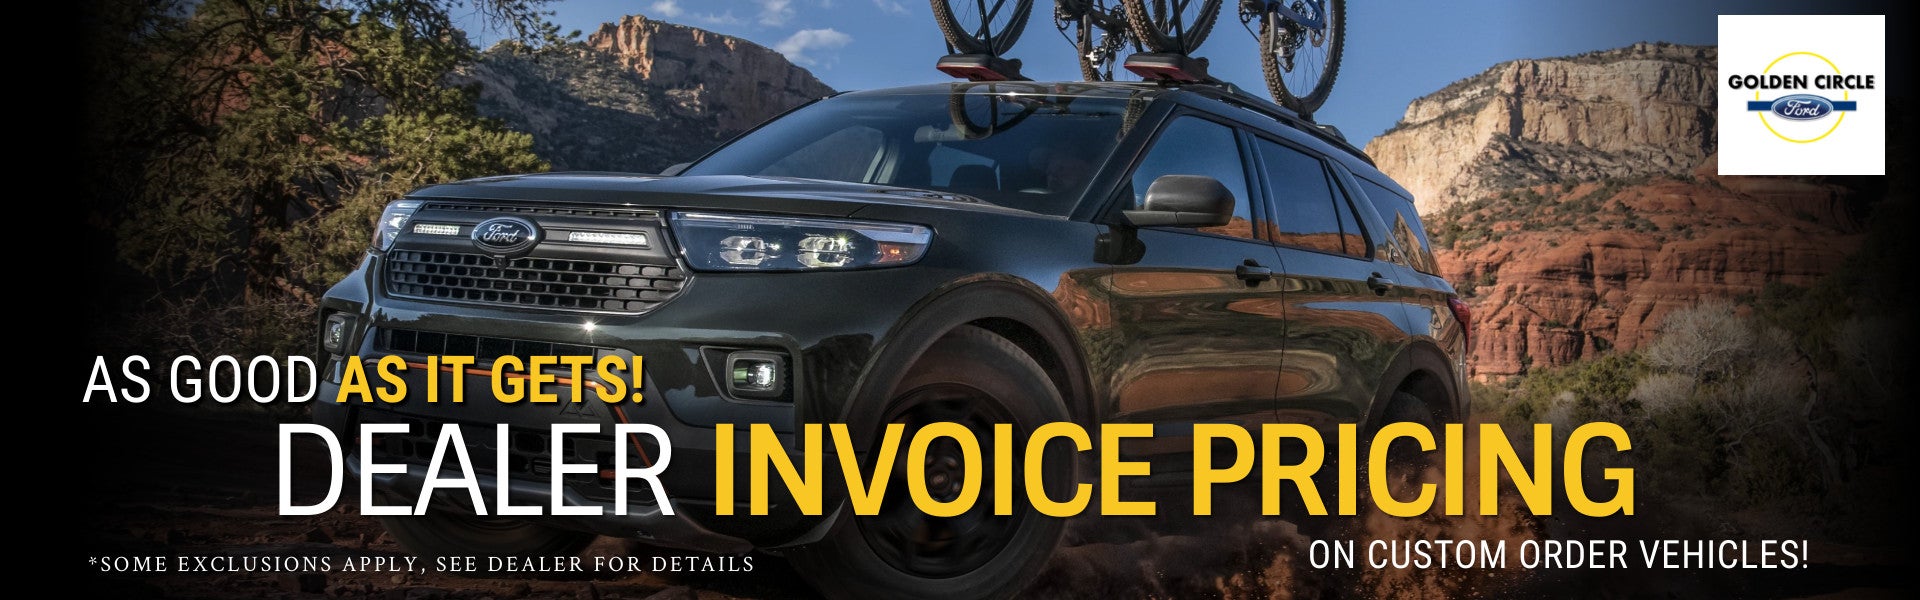 Invoice Pricing on New Vehicles